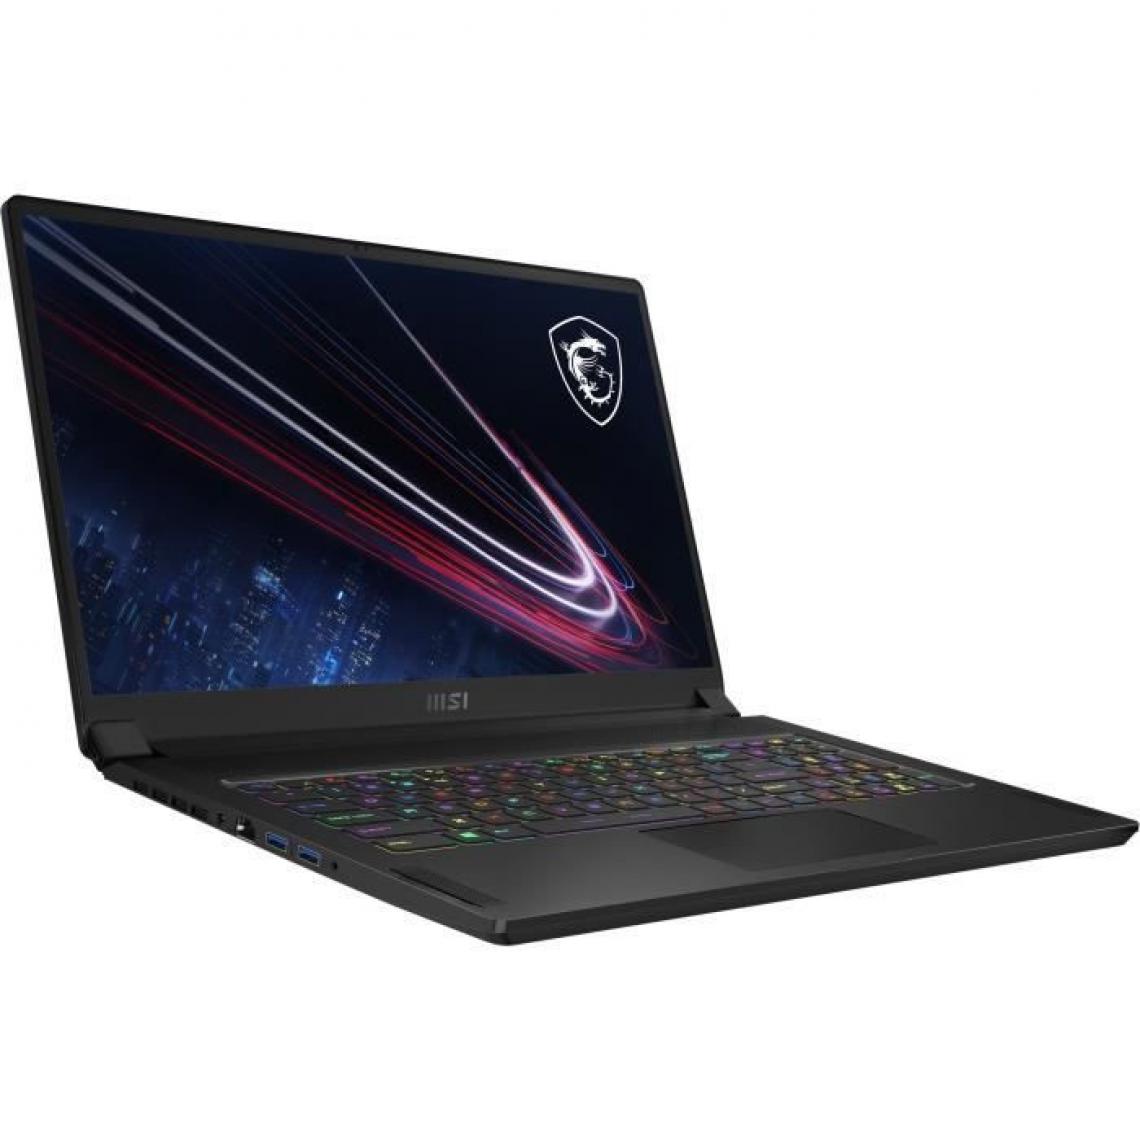 Msi - PC Portable Gamer - MSI - GS76 Stealth 11UE-004FR - 17,3 FHD 360Hz - i7-11800H - 16Go - Stockage 1To SSD - RTX 3060 - W10H - AZE - PC Portable